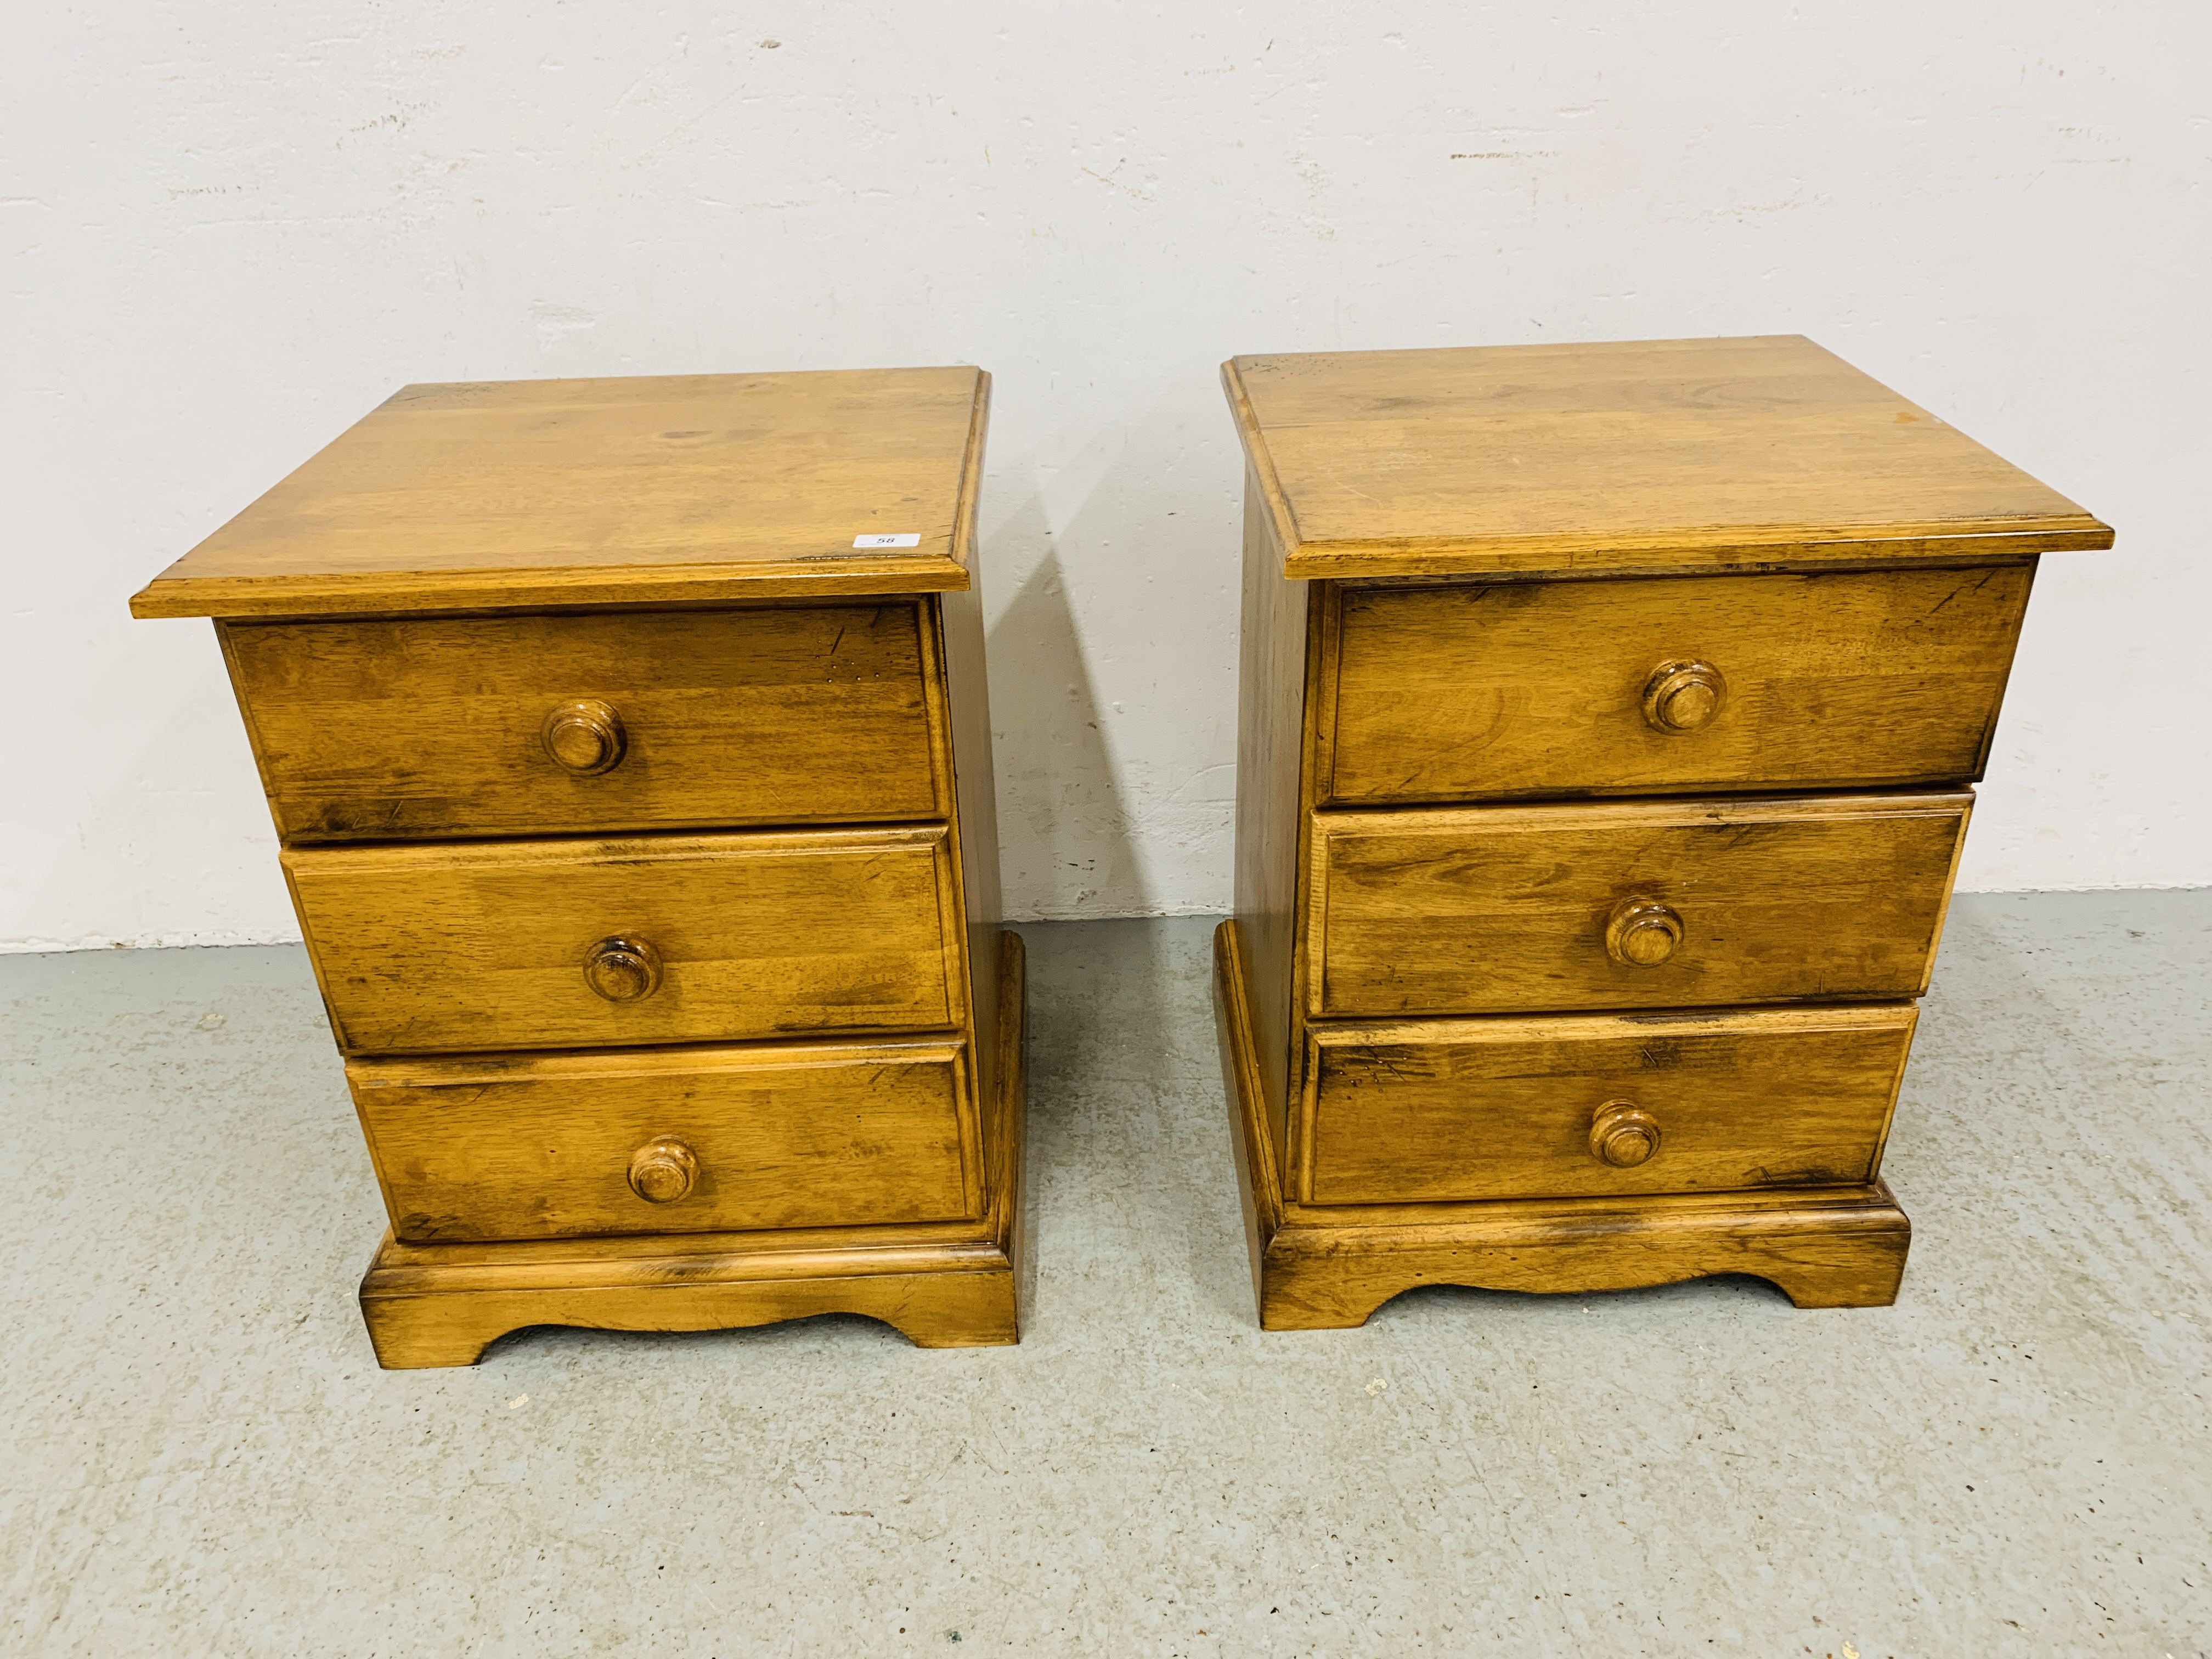 PAIR OF MODERN HARDWOOD 3 DRAWER BEDSIDE CHESTS, WITH TURNED HANDLES - W 49CM. D 46CM. H 63CM.